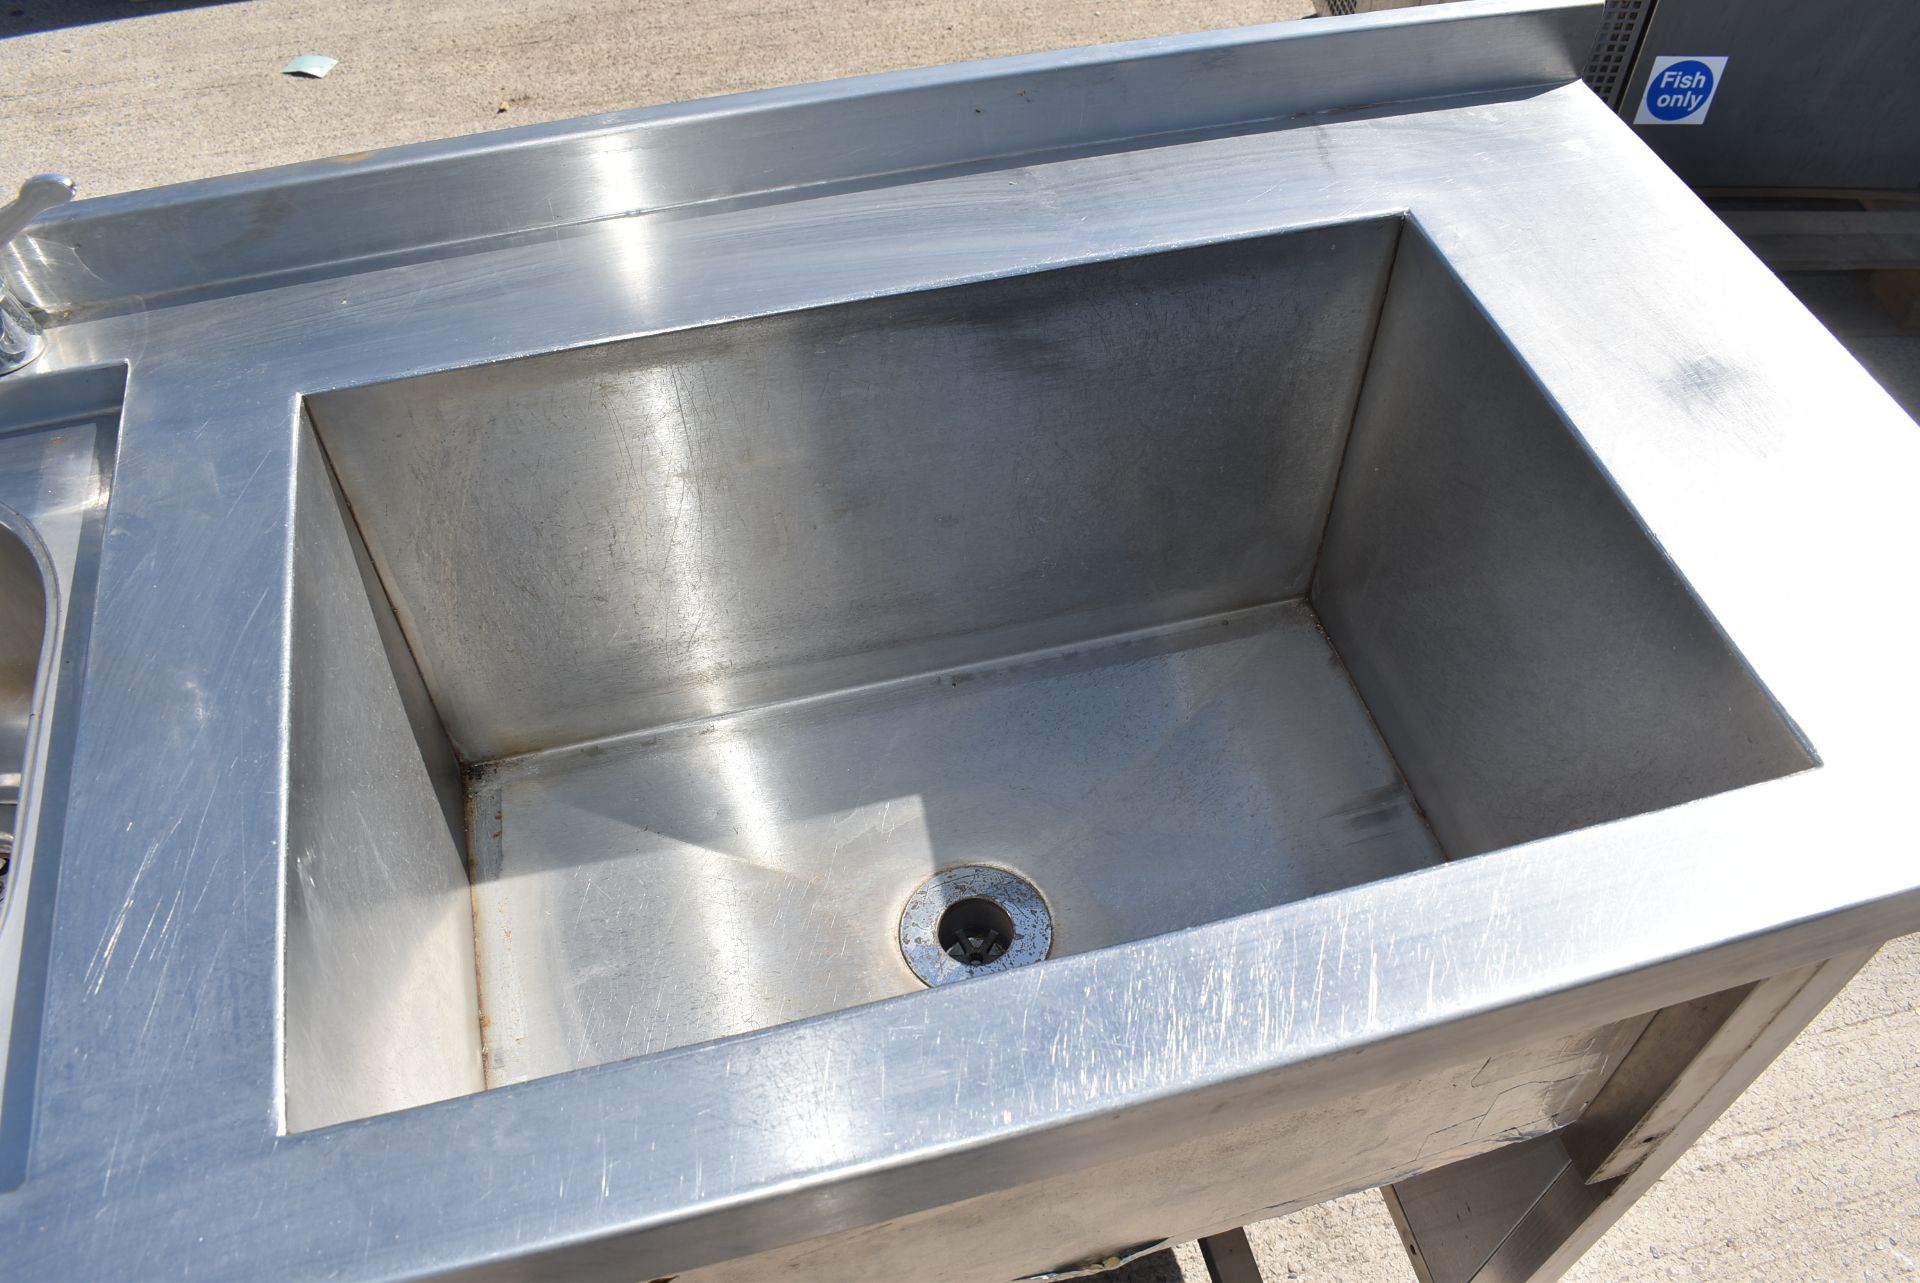 1 x Stainless Steel Wash Basin Unit For Commercial Kitchens - H87 x W117 x D53 cms - CL282 - Ref - Image 3 of 8